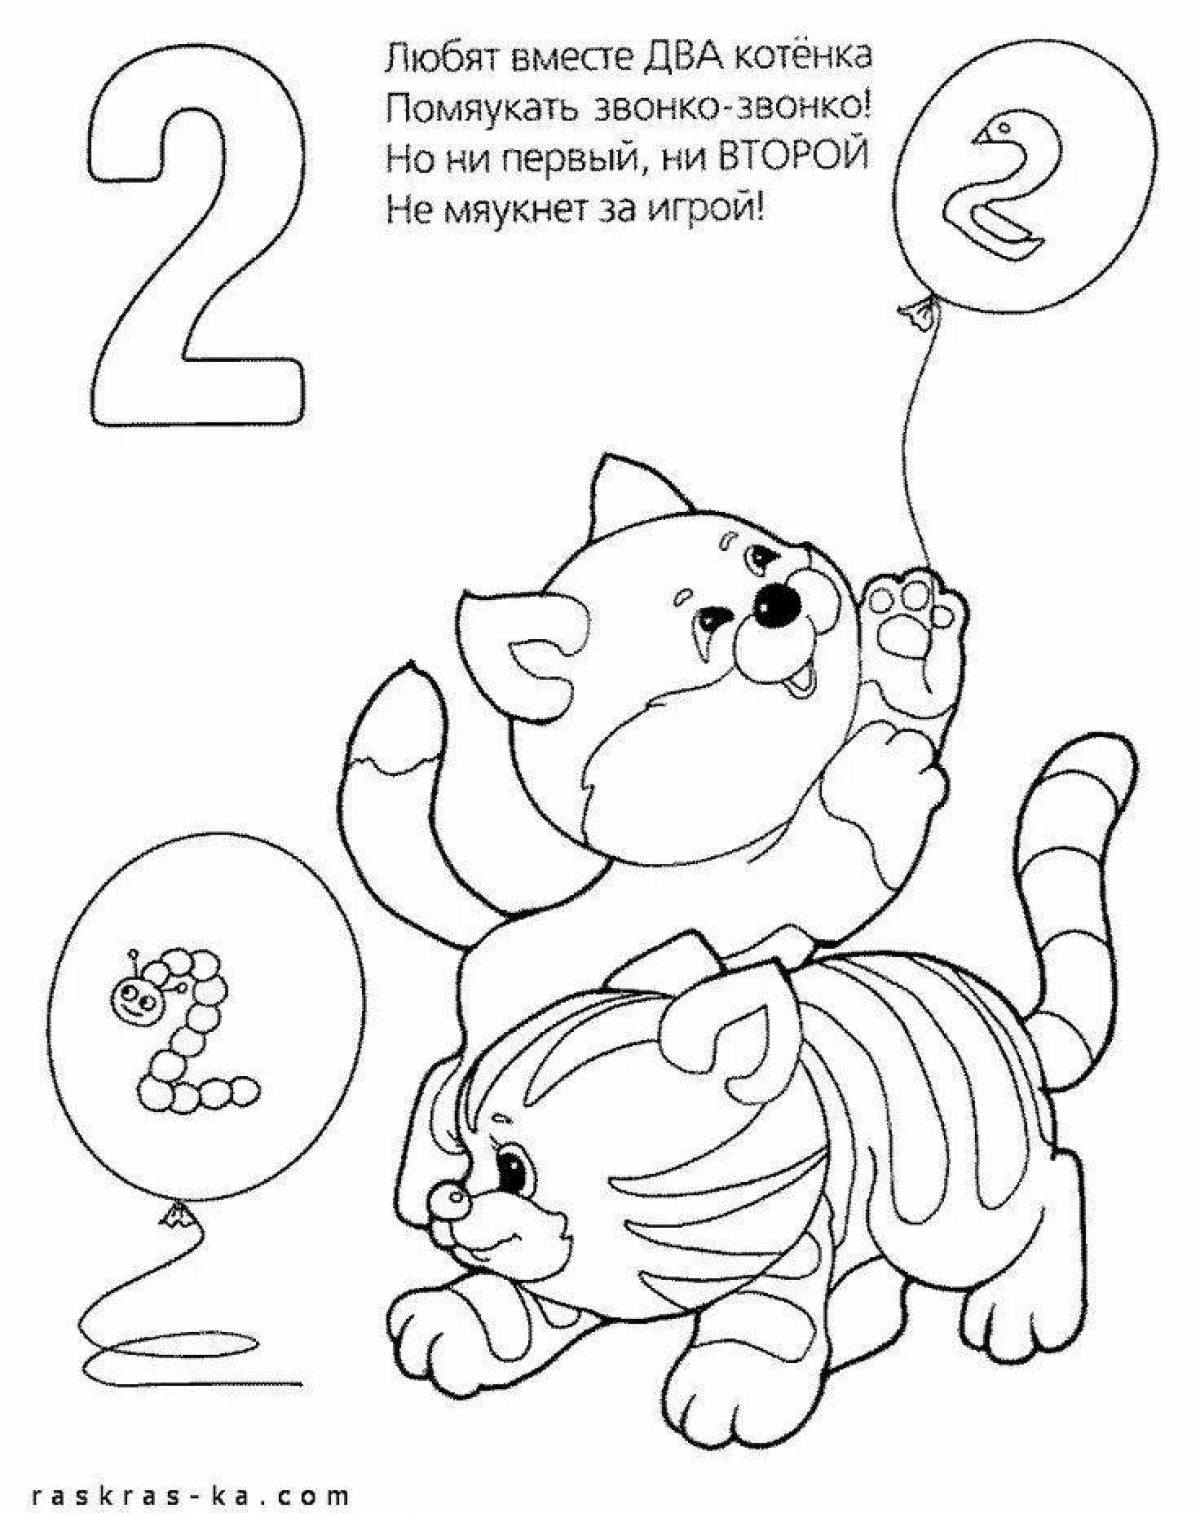 Fun coloring number 2 for kids